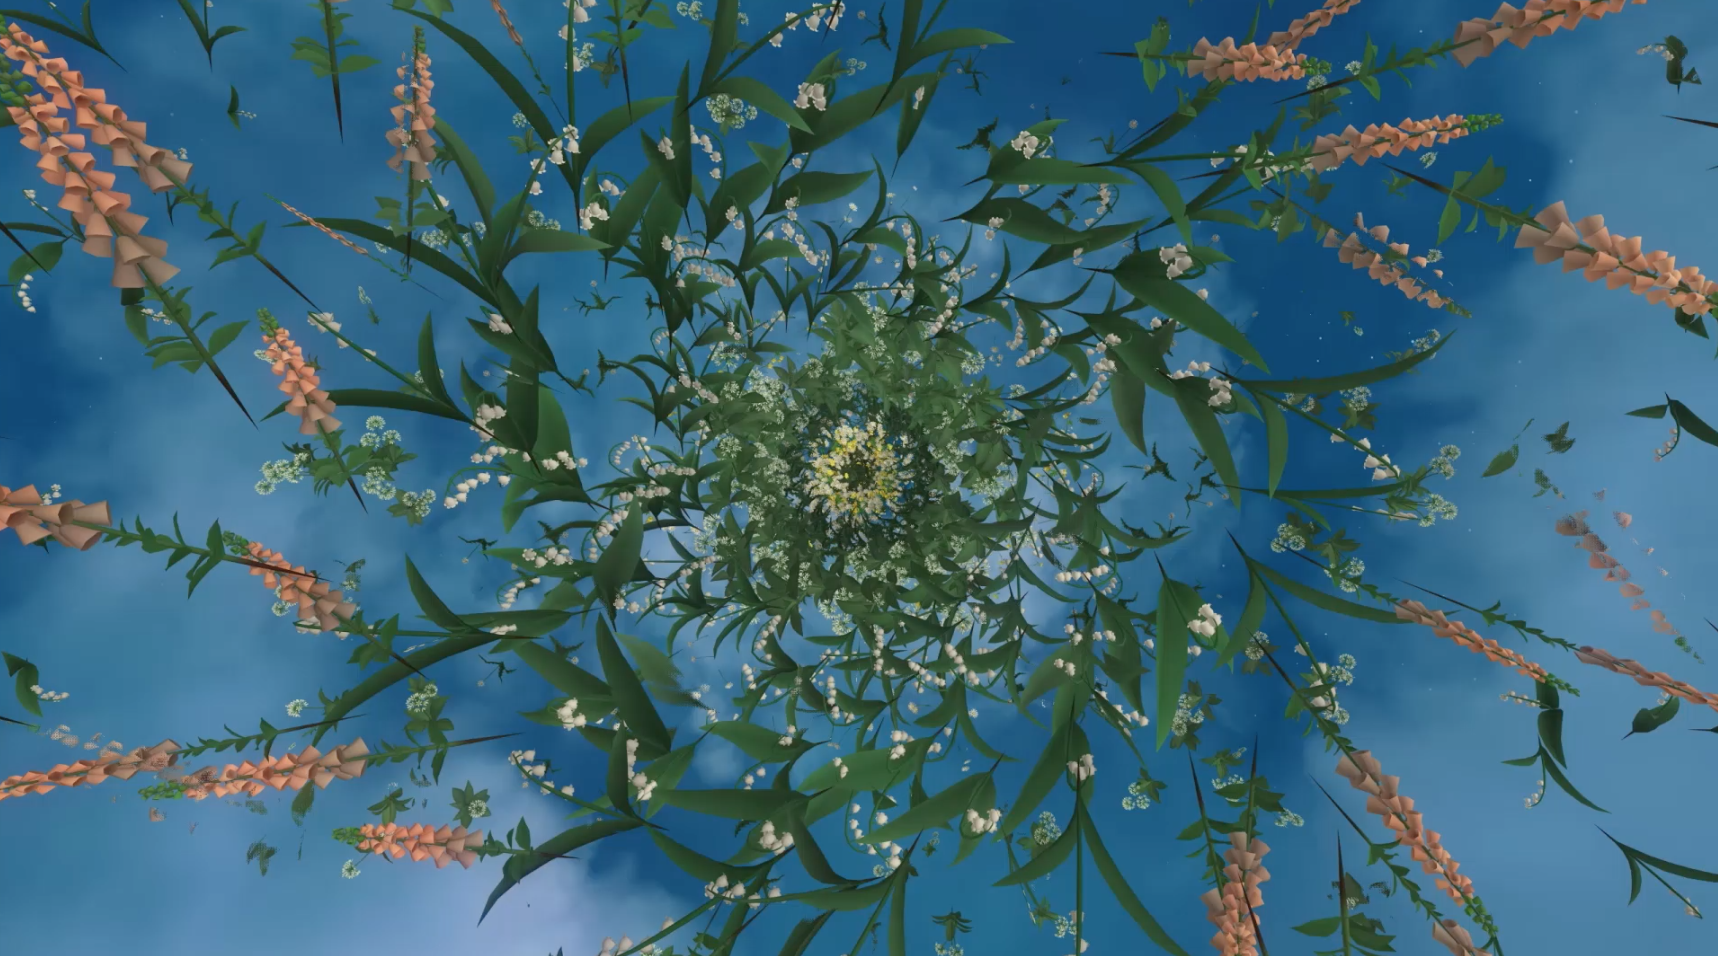 Floral structure in circular form